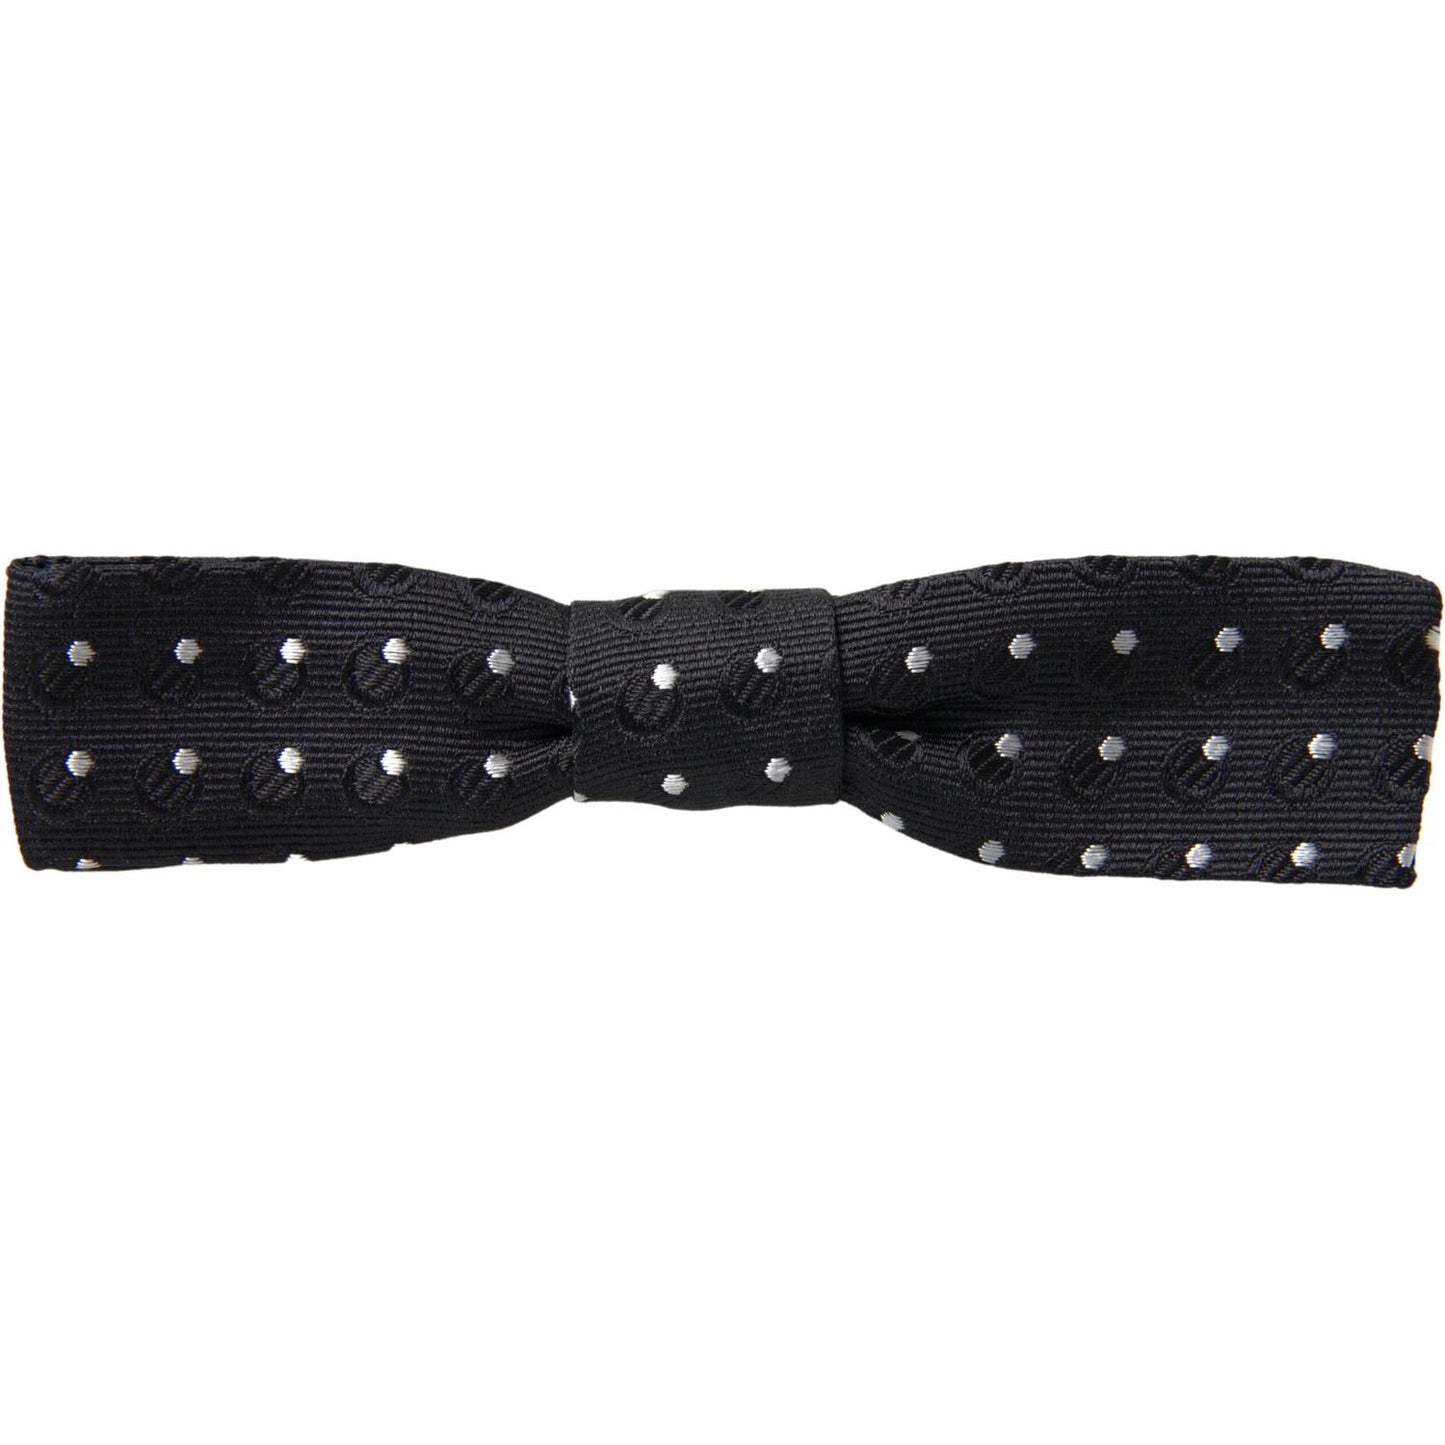 Elegant Silk Bow Tie for Sophisticated Evenings Dolce & Gabbana